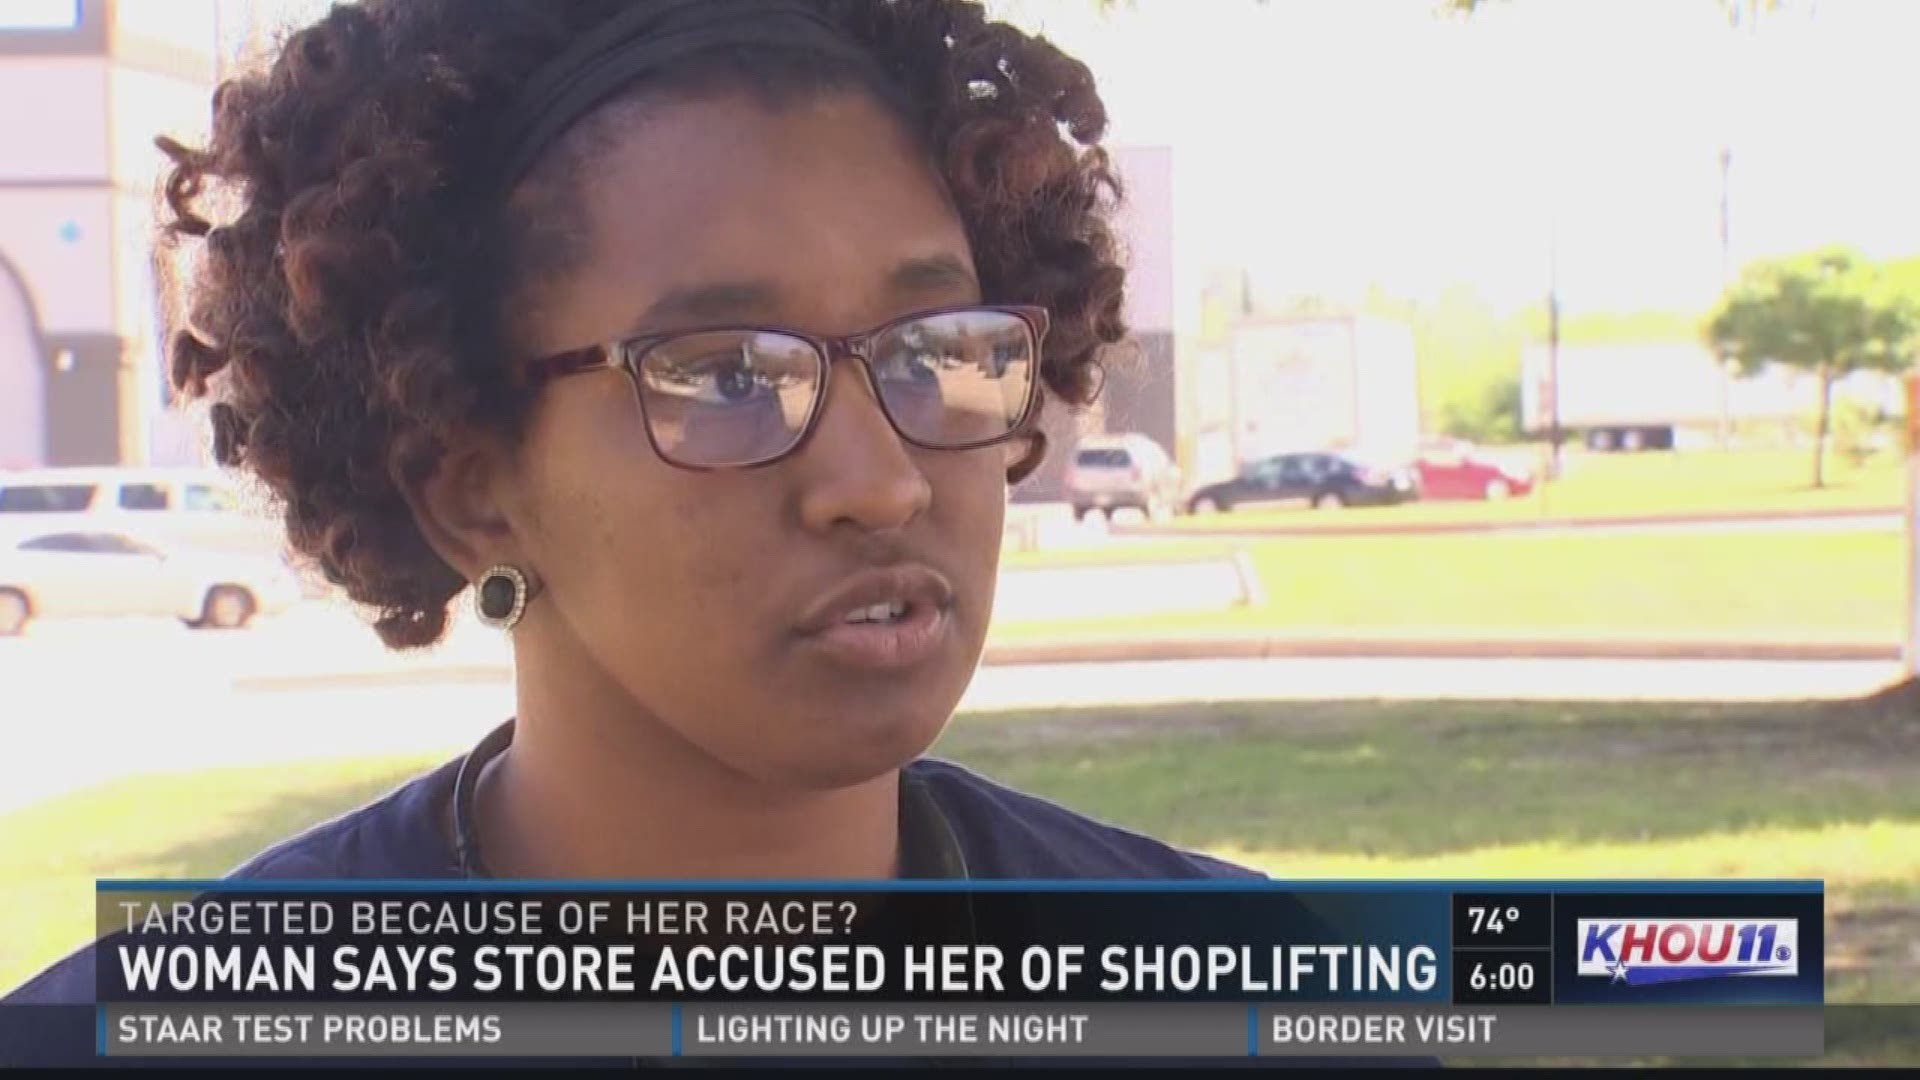 A local woman is speaking out after she claims she was profiled while shopping at an Osh Kosh store near The Woodlands.